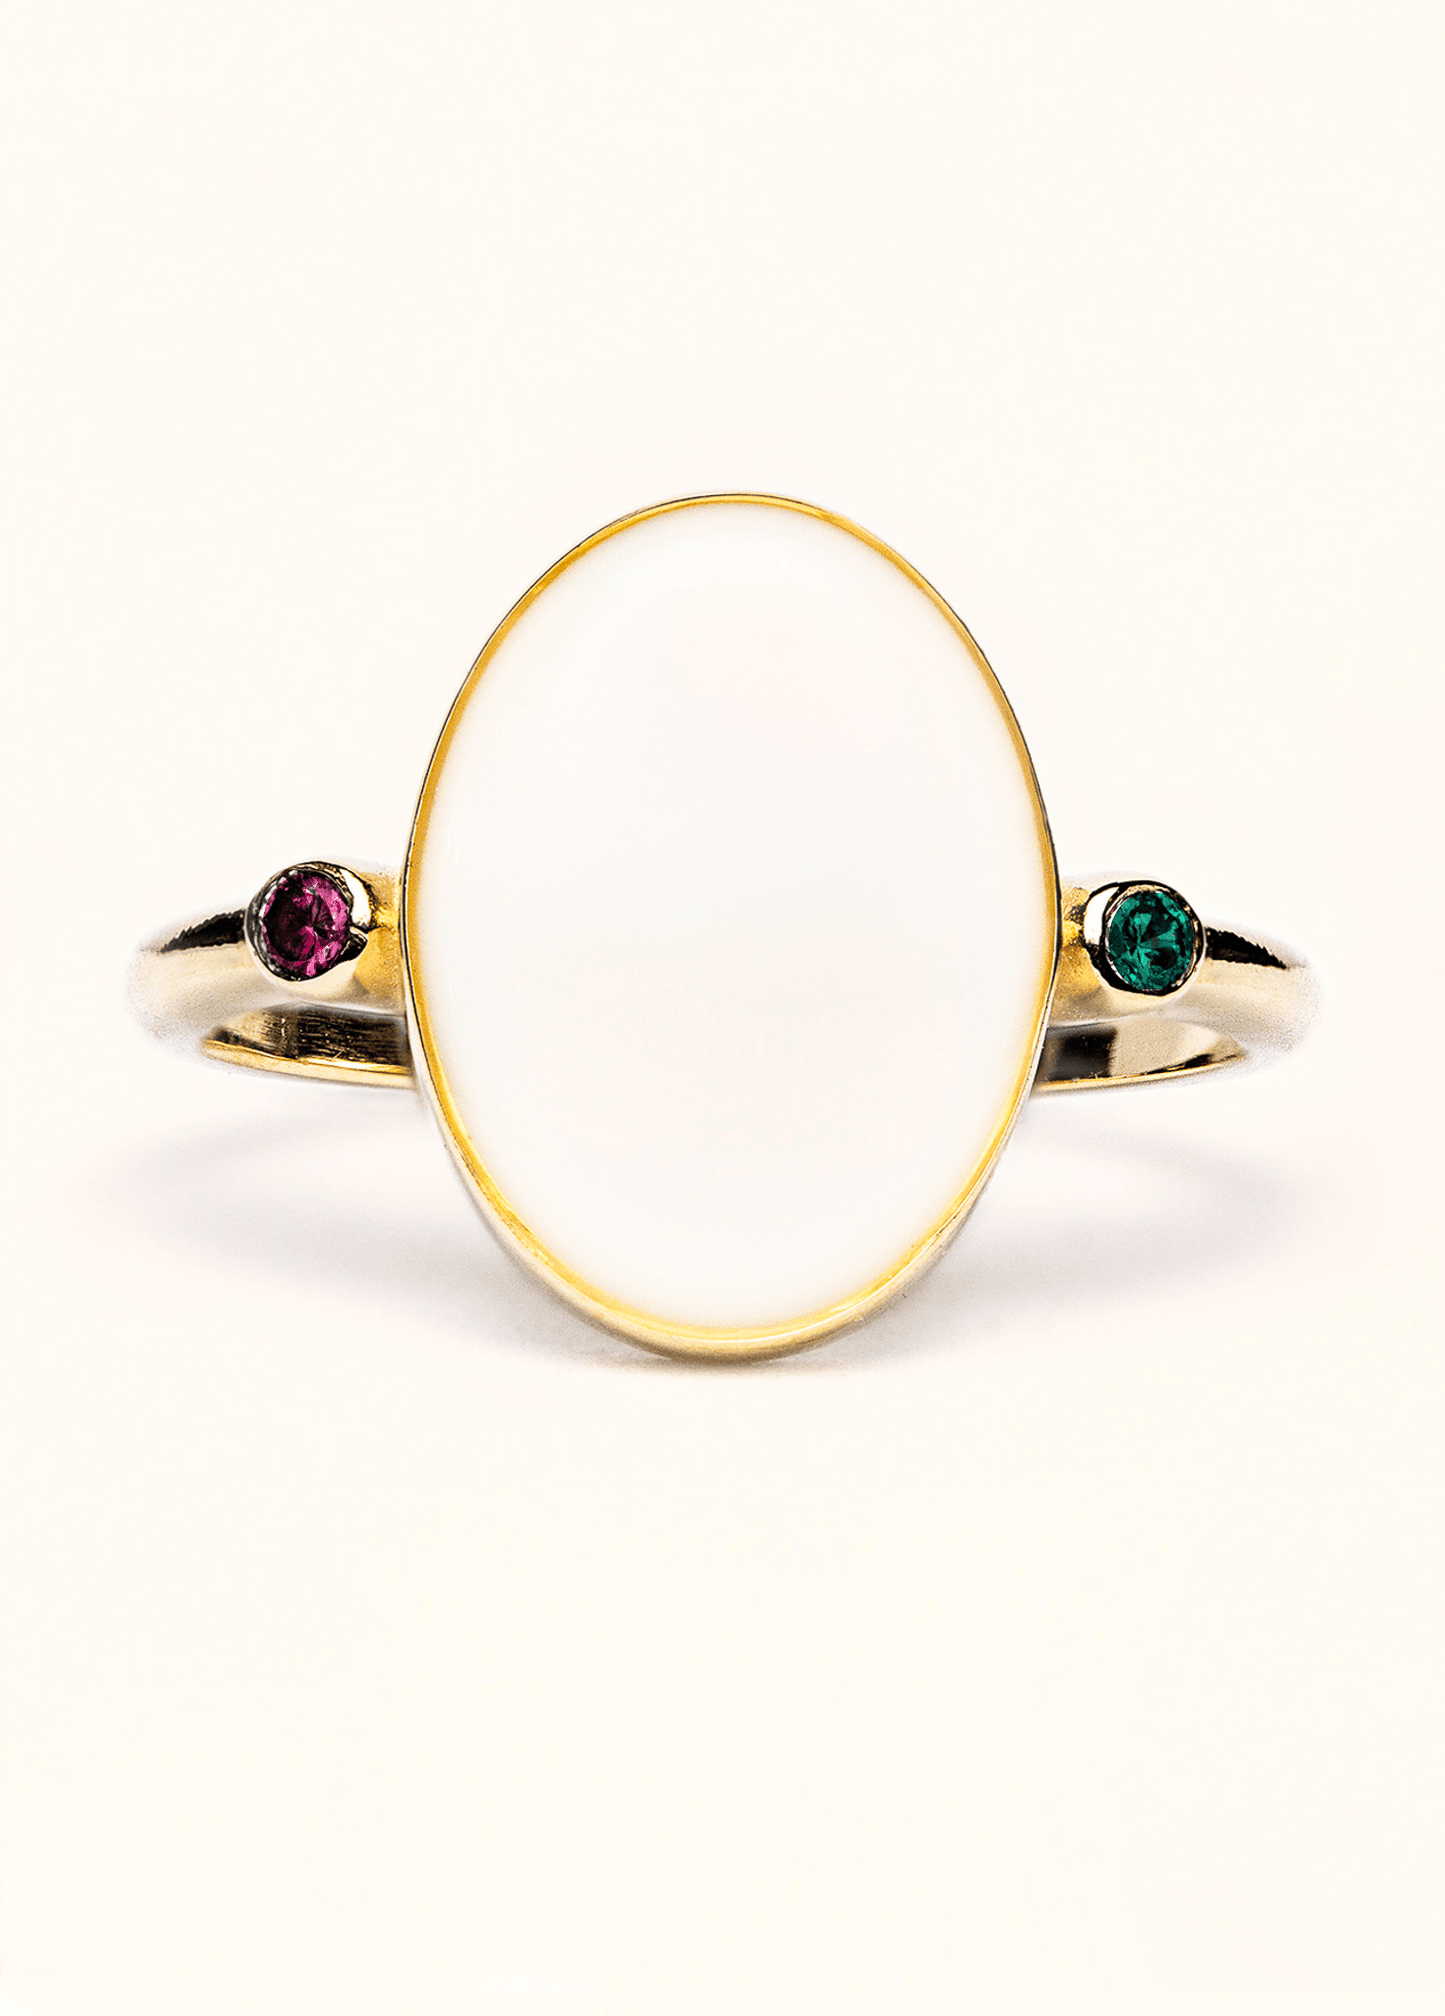 Oval Timeless with Birthstones - Mamma's Liquid Love